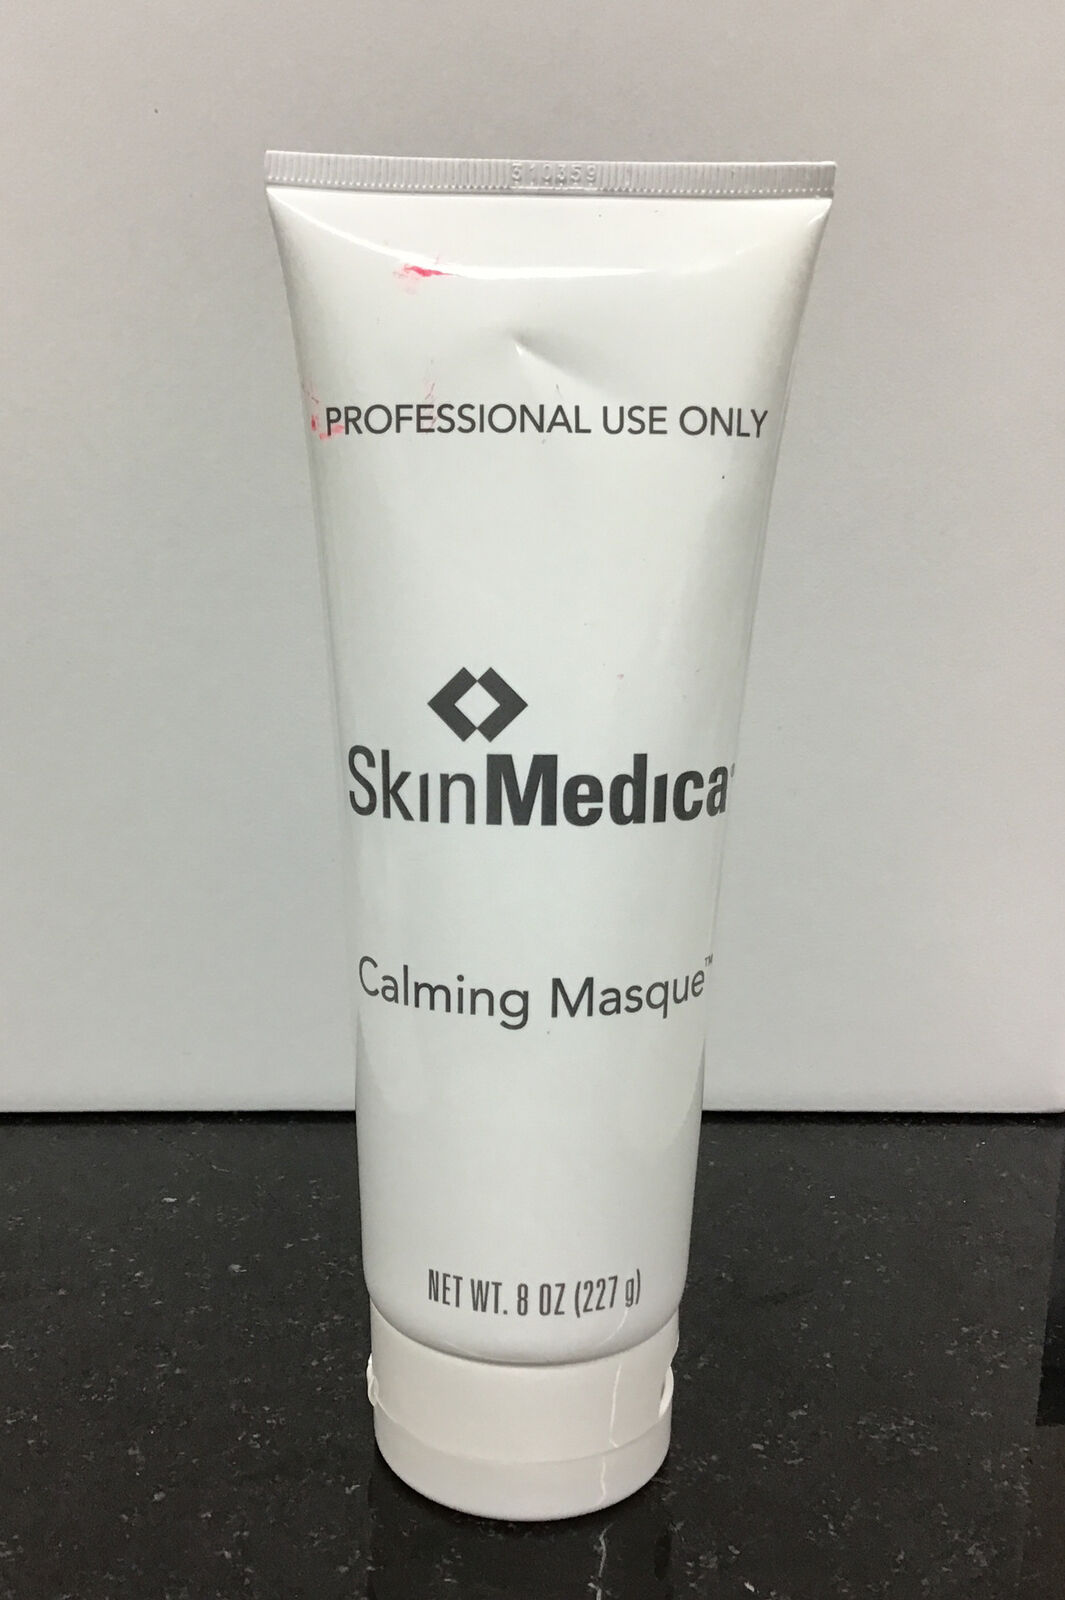 SkinMedica Purifying Masque 8 Oz, As pictured